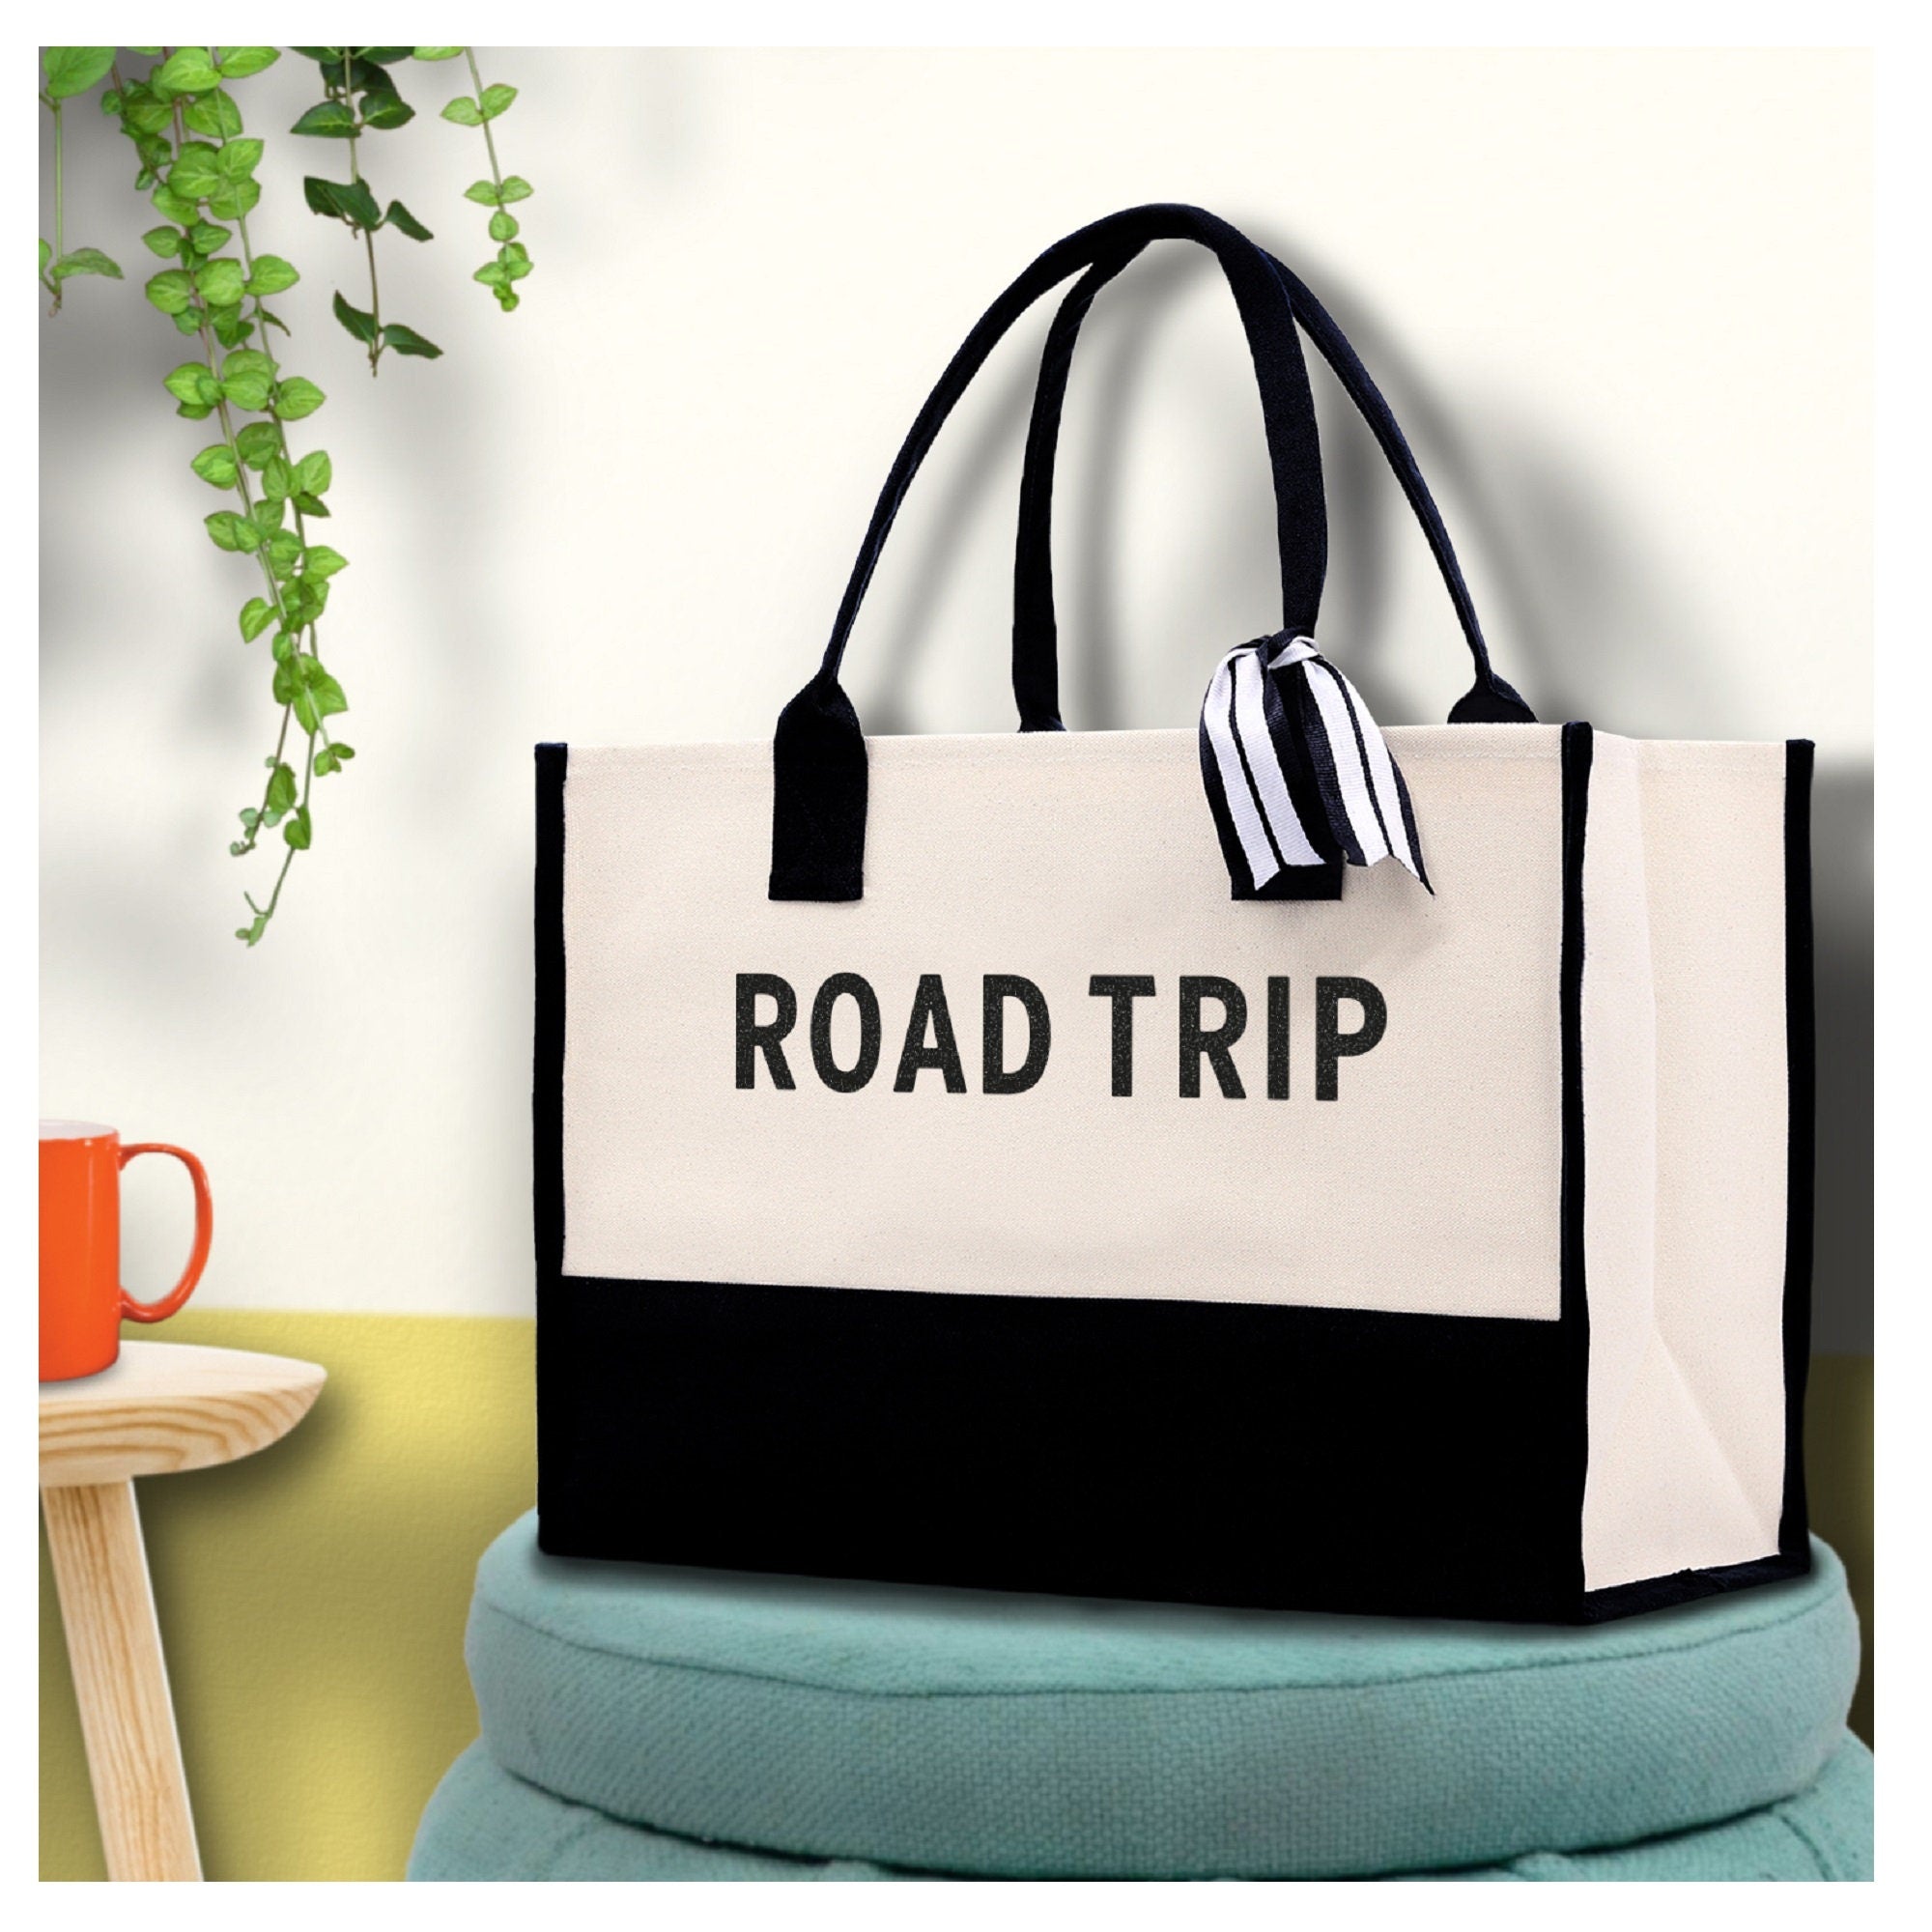 Road Trip Beach Tote Bag - Large Chic Tote Bag - Gift for Her - Vacation Tote Bag - Weekender Bag - Travel Tote